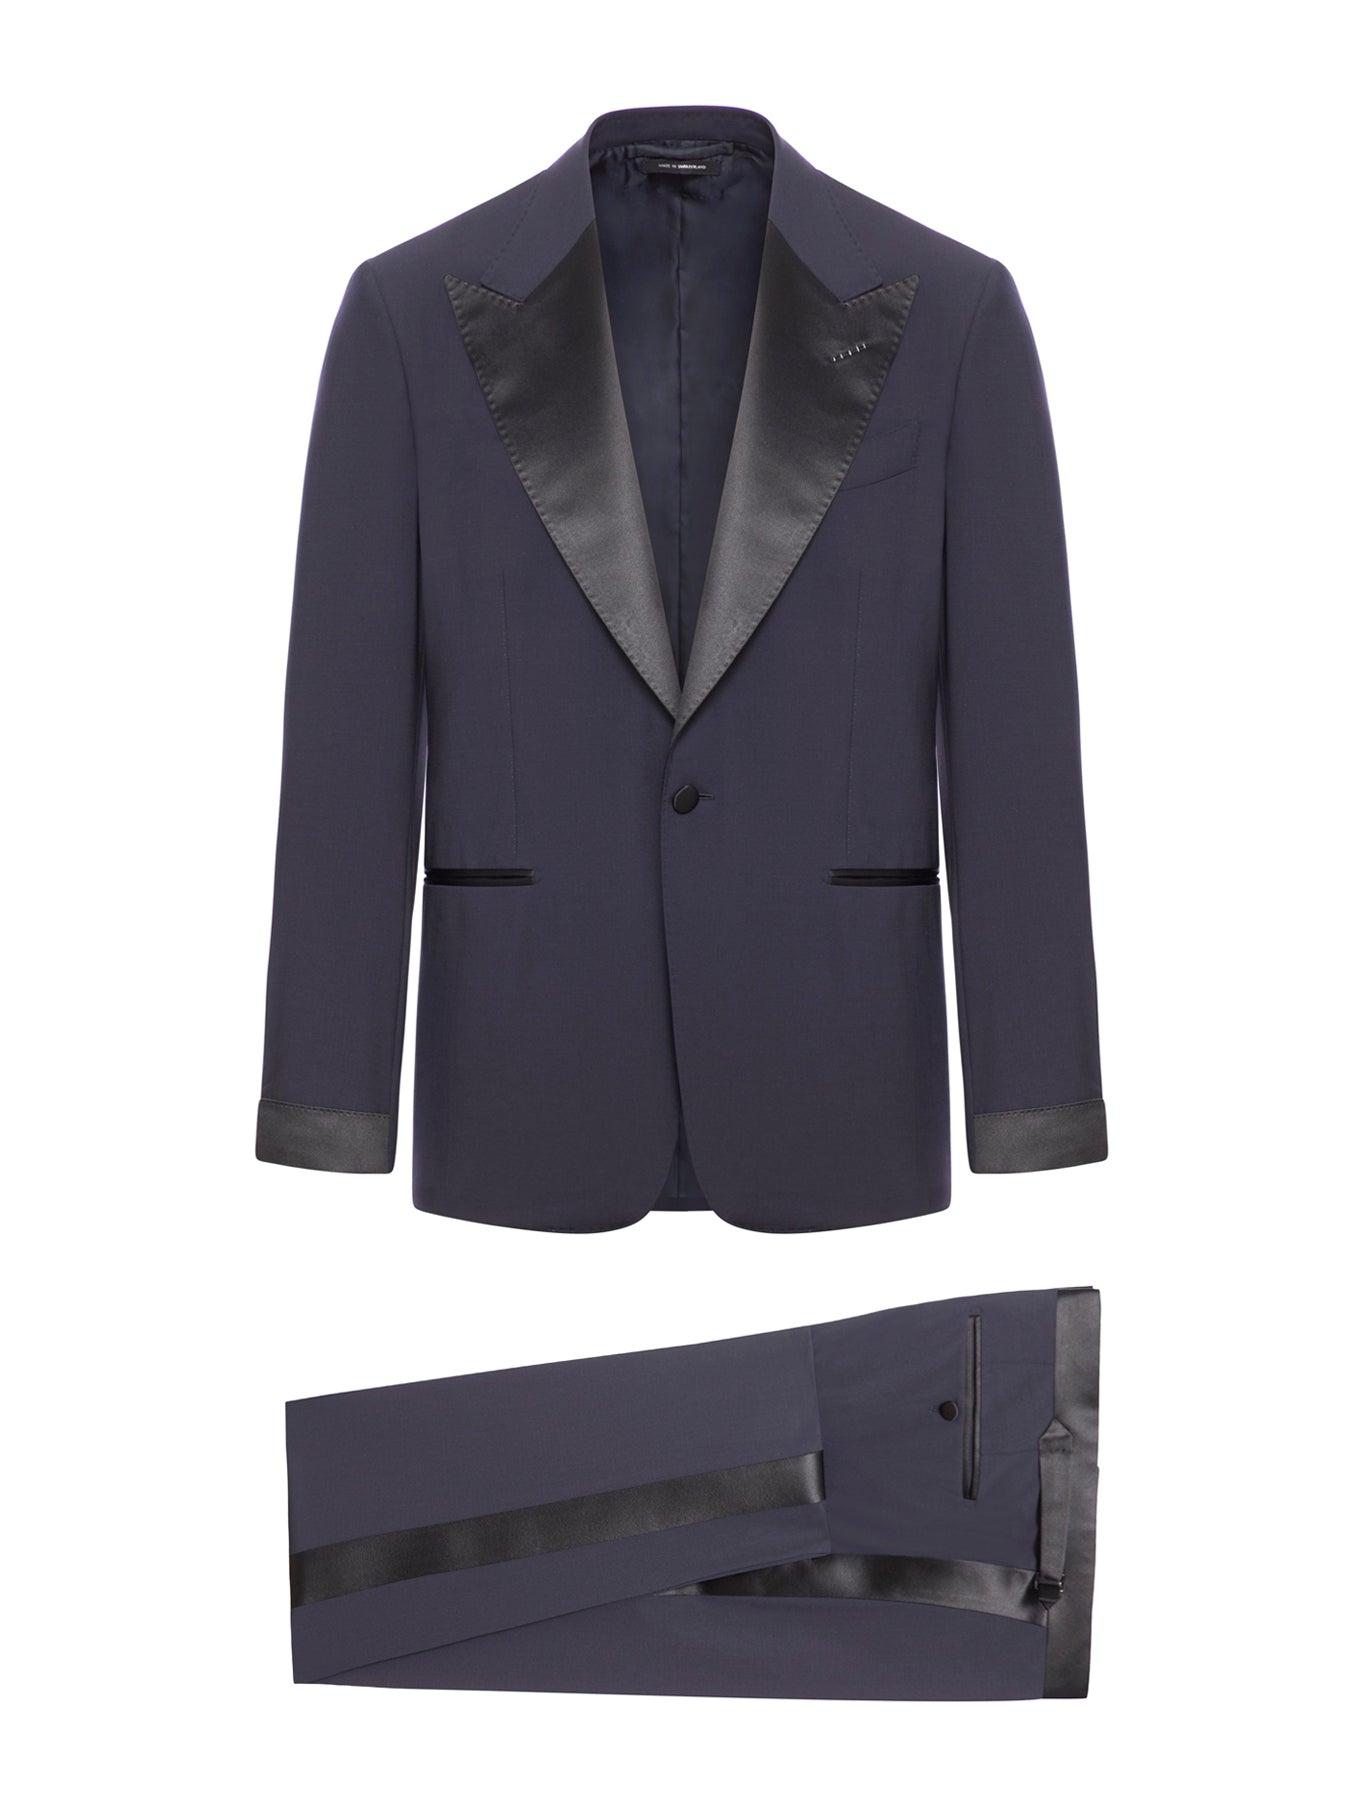 two-piece single-breasted dinner suit